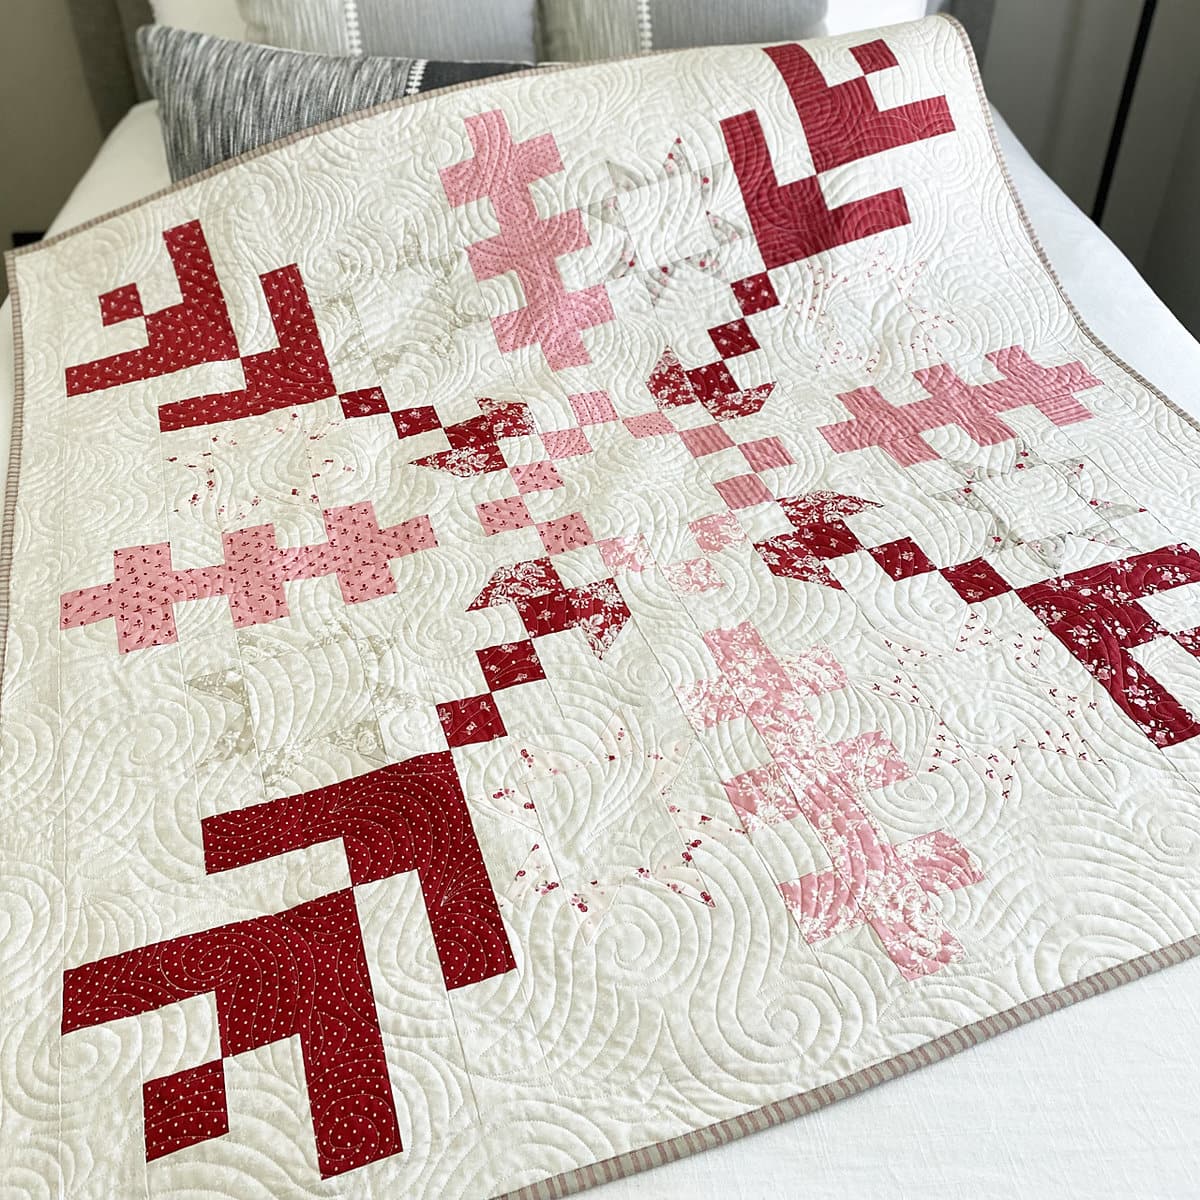 This Jelly Snowflake Quilt was made by Nichol Spohr with The Flower Farm by Bunny Hill Designs for Moda Fabrics.